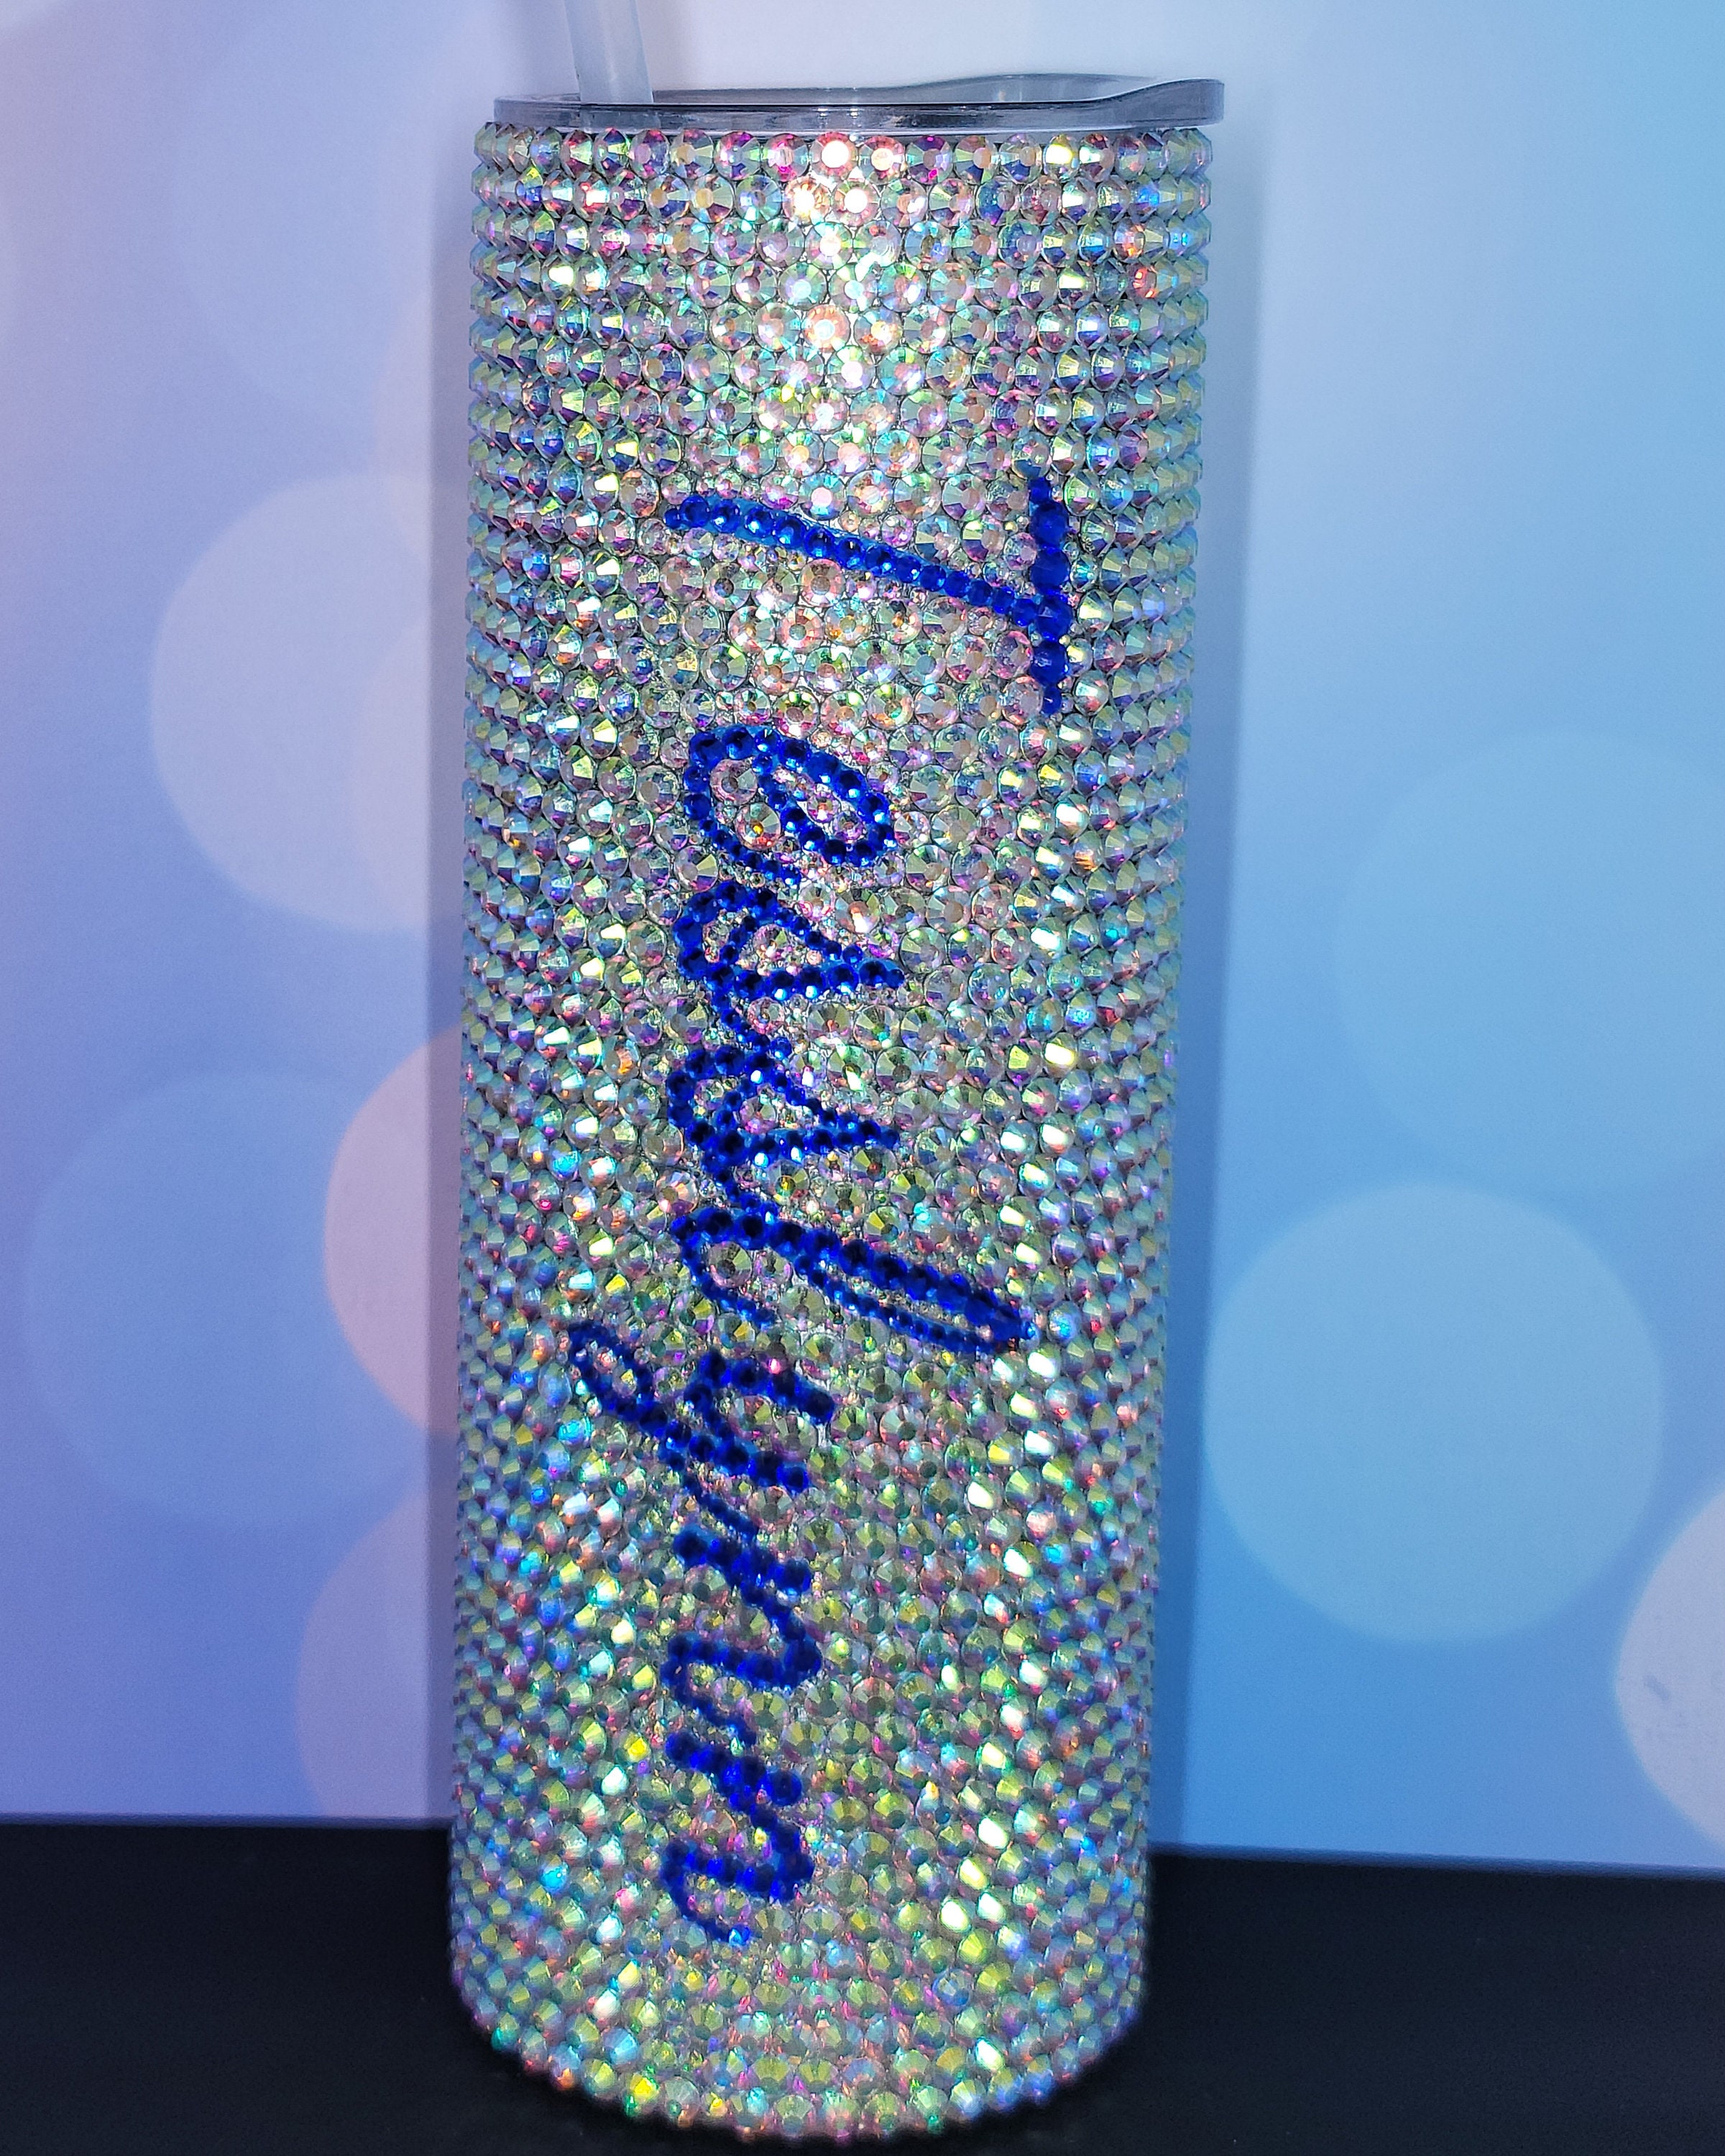 Bling Stanley tumbler - pool - baby blue - light blue premium rhinestones  40 oz cup with handle - HTF cup - free shipping! Tik Tok cup